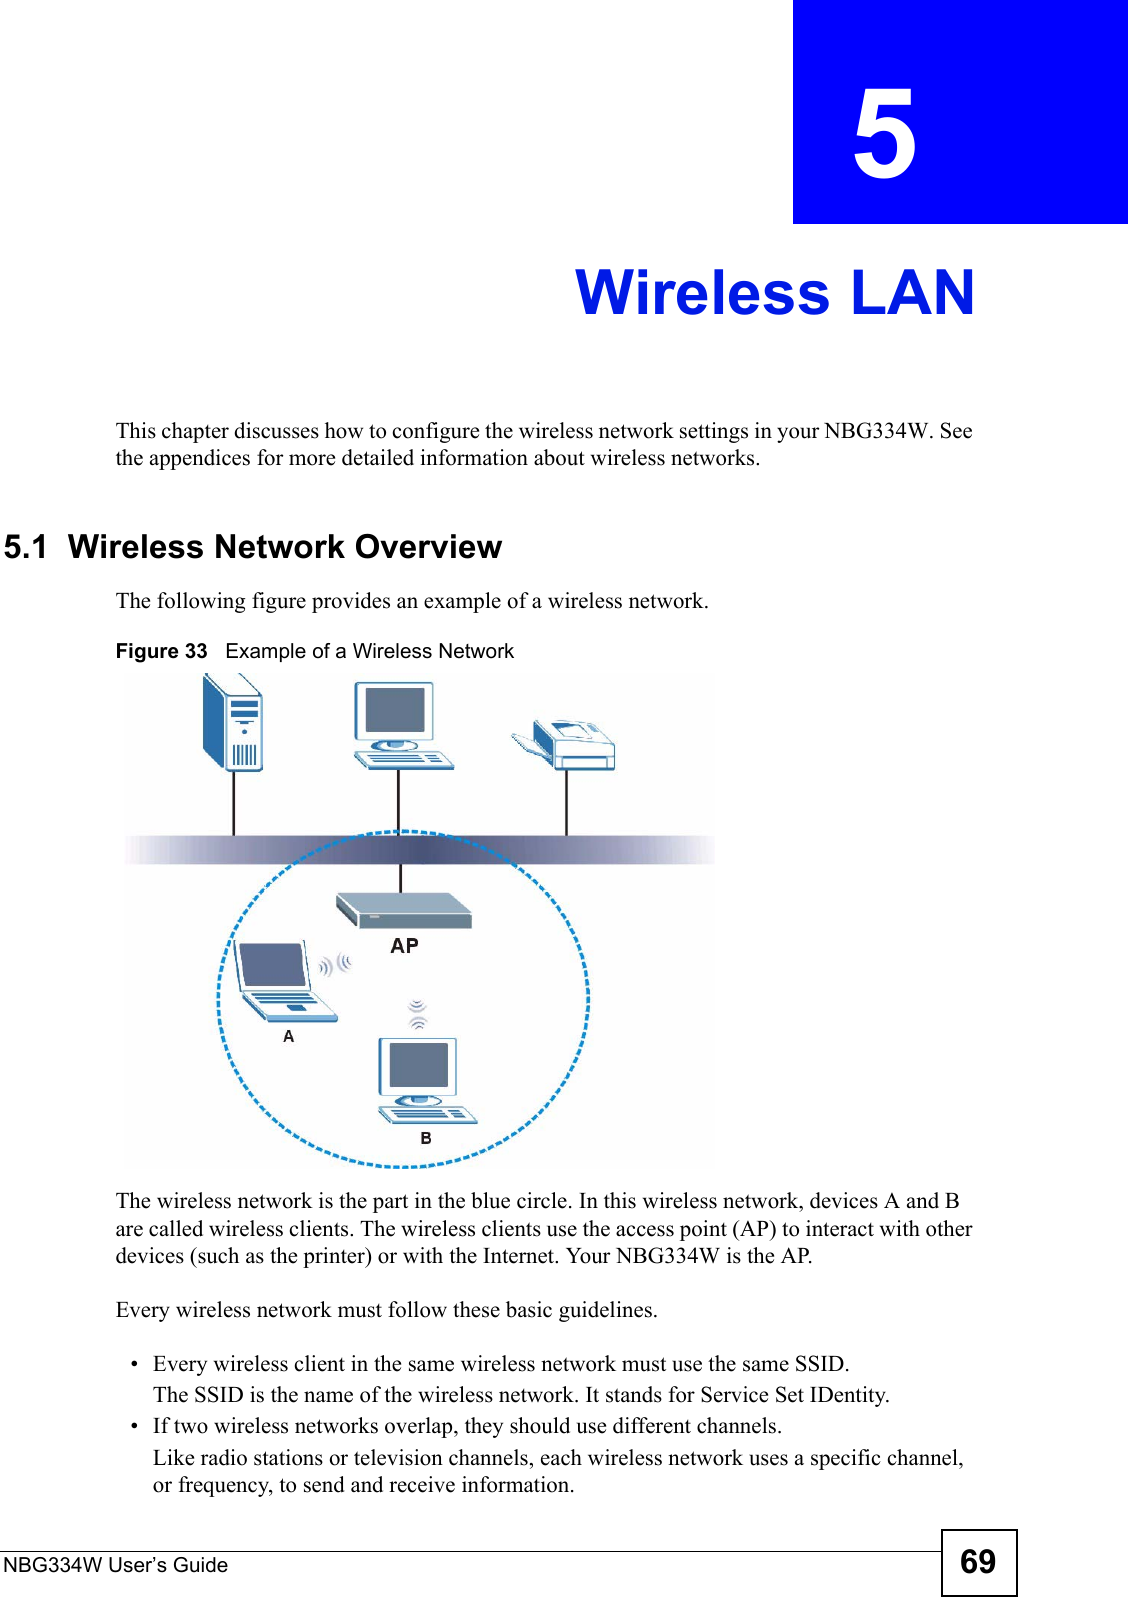 NBG334W User’s Guide 69CHAPTER  5 Wireless LANThis chapter discusses how to configure the wireless network settings in your NBG334W. See the appendices for more detailed information about wireless networks.5.1  Wireless Network OverviewThe following figure provides an example of a wireless network.Figure 33   Example of a Wireless NetworkThe wireless network is the part in the blue circle. In this wireless network, devices A and B are called wireless clients. The wireless clients use the access point (AP) to interact with other devices (such as the printer) or with the Internet. Your NBG334W is the AP.Every wireless network must follow these basic guidelines.• Every wireless client in the same wireless network must use the same SSID.The SSID is the name of the wireless network. It stands for Service Set IDentity.• If two wireless networks overlap, they should use different channels.Like radio stations or television channels, each wireless network uses a specific channel, or frequency, to send and receive information.